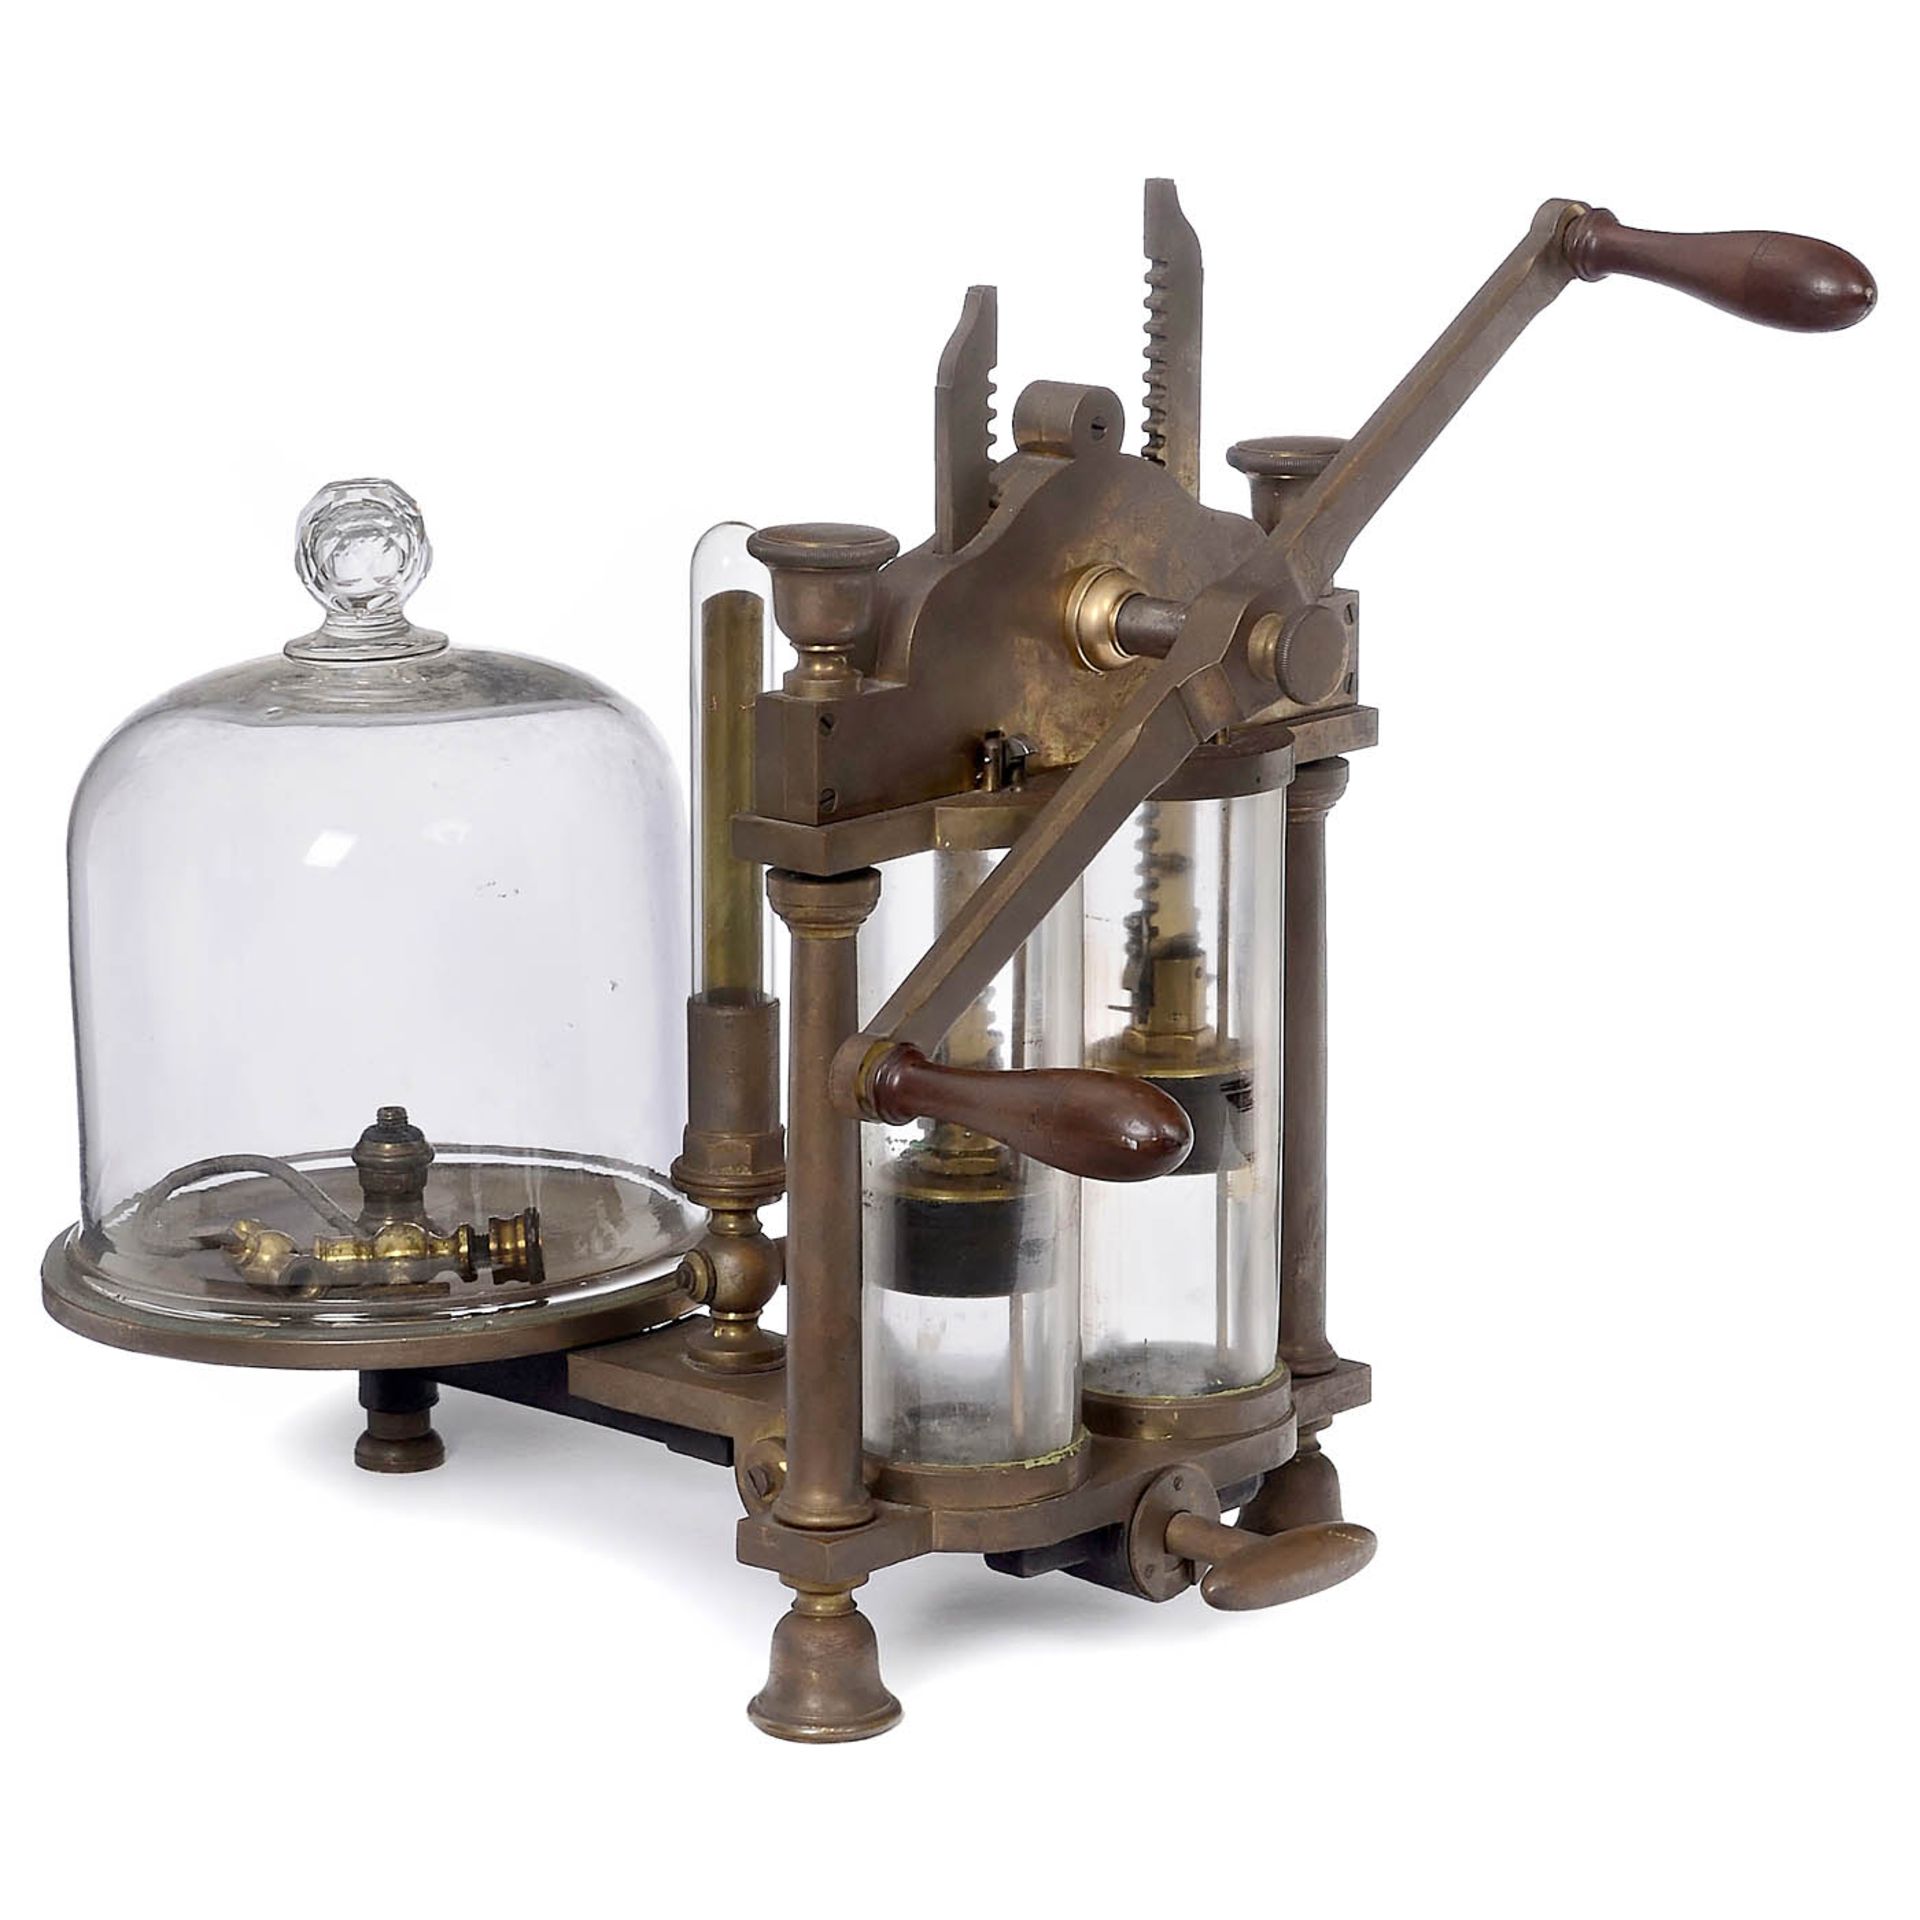 Demonstration Vacuum Pump with Accessories, c. 1880 - Image 2 of 4